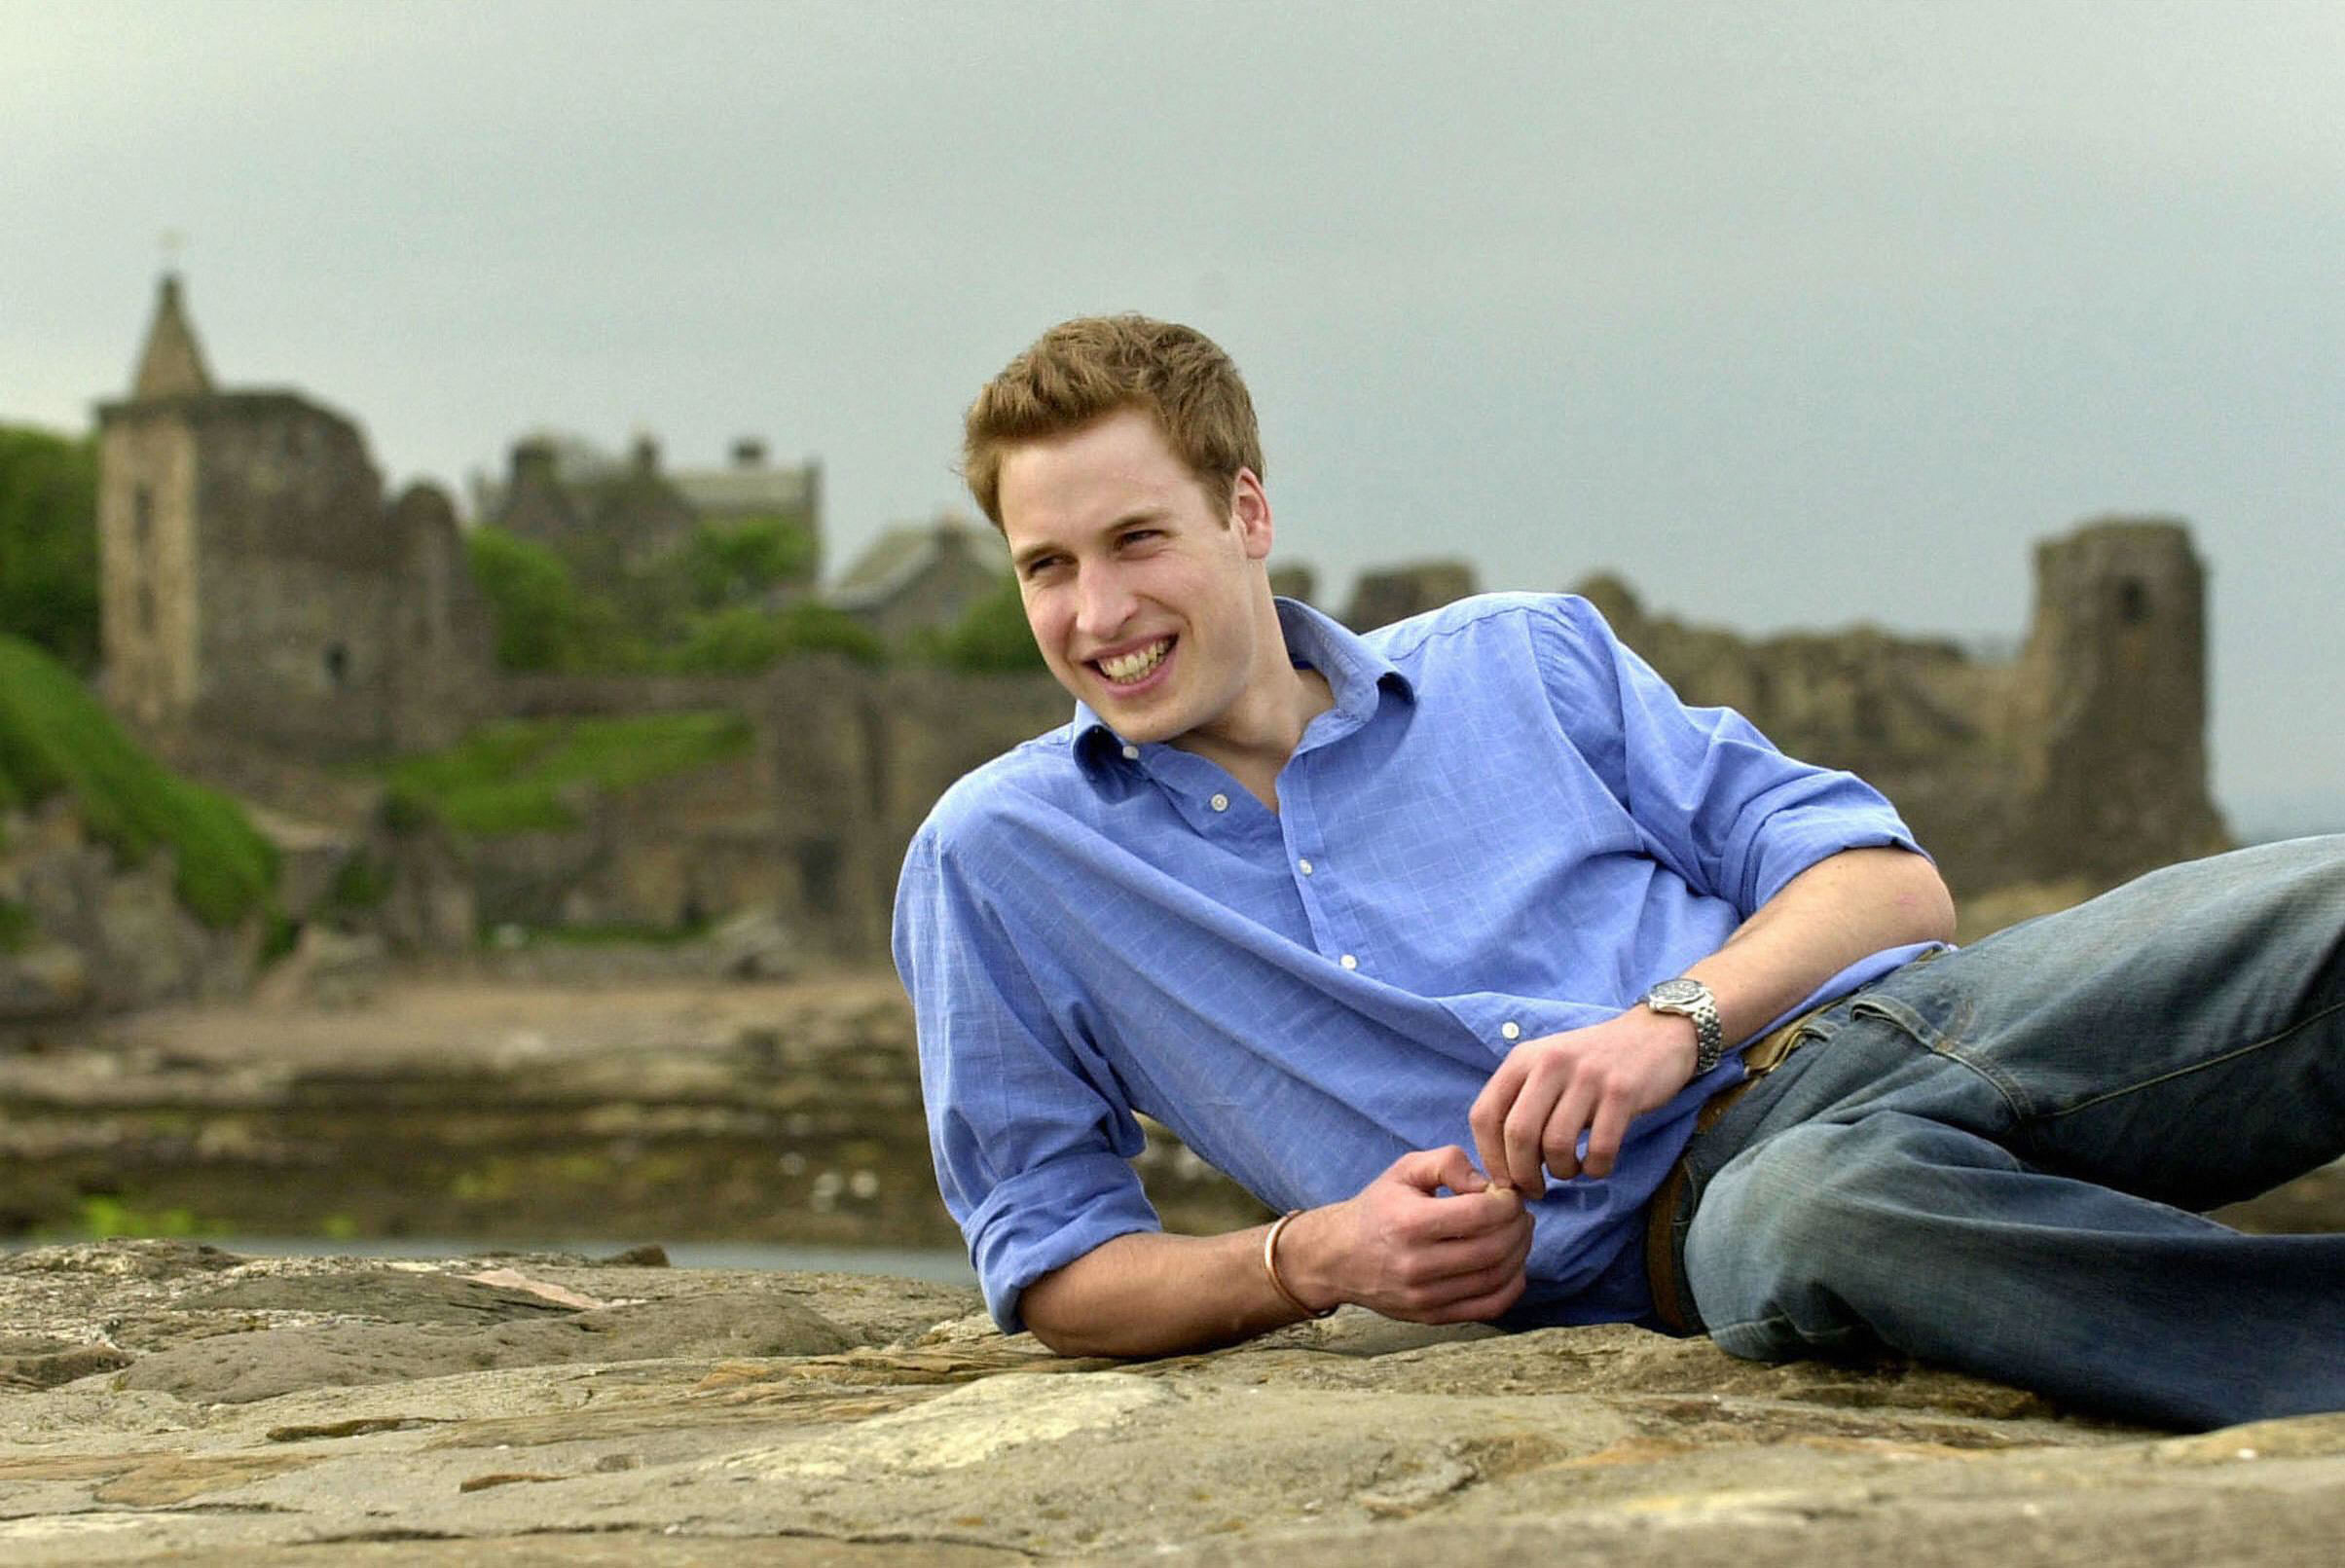 Prince William poses on the pier at University of St. Andrews in Scotland